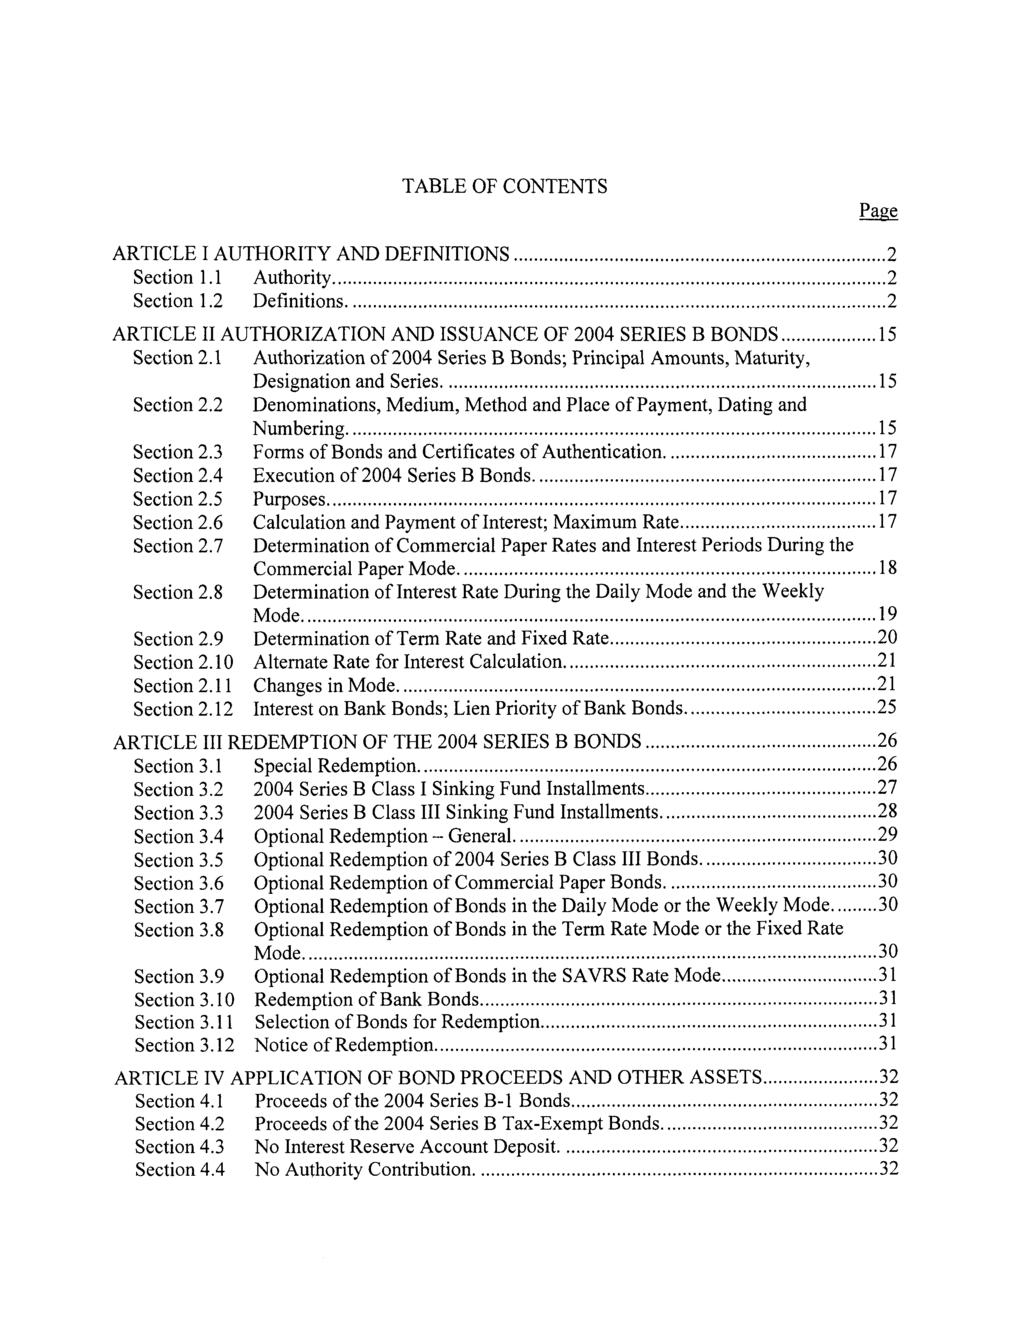 TABLE OF CONTENTS Paae ARTICLE I AUTHORITY AND DEFINITIONS... 2 Section 1. 1 Authority... 2 Section 1.2 Definitions... 2 ARTICLE I1 AUTHORIZATION AND ISSUANCE OF 2004 SERIES B BONDS... 15 Section 2.